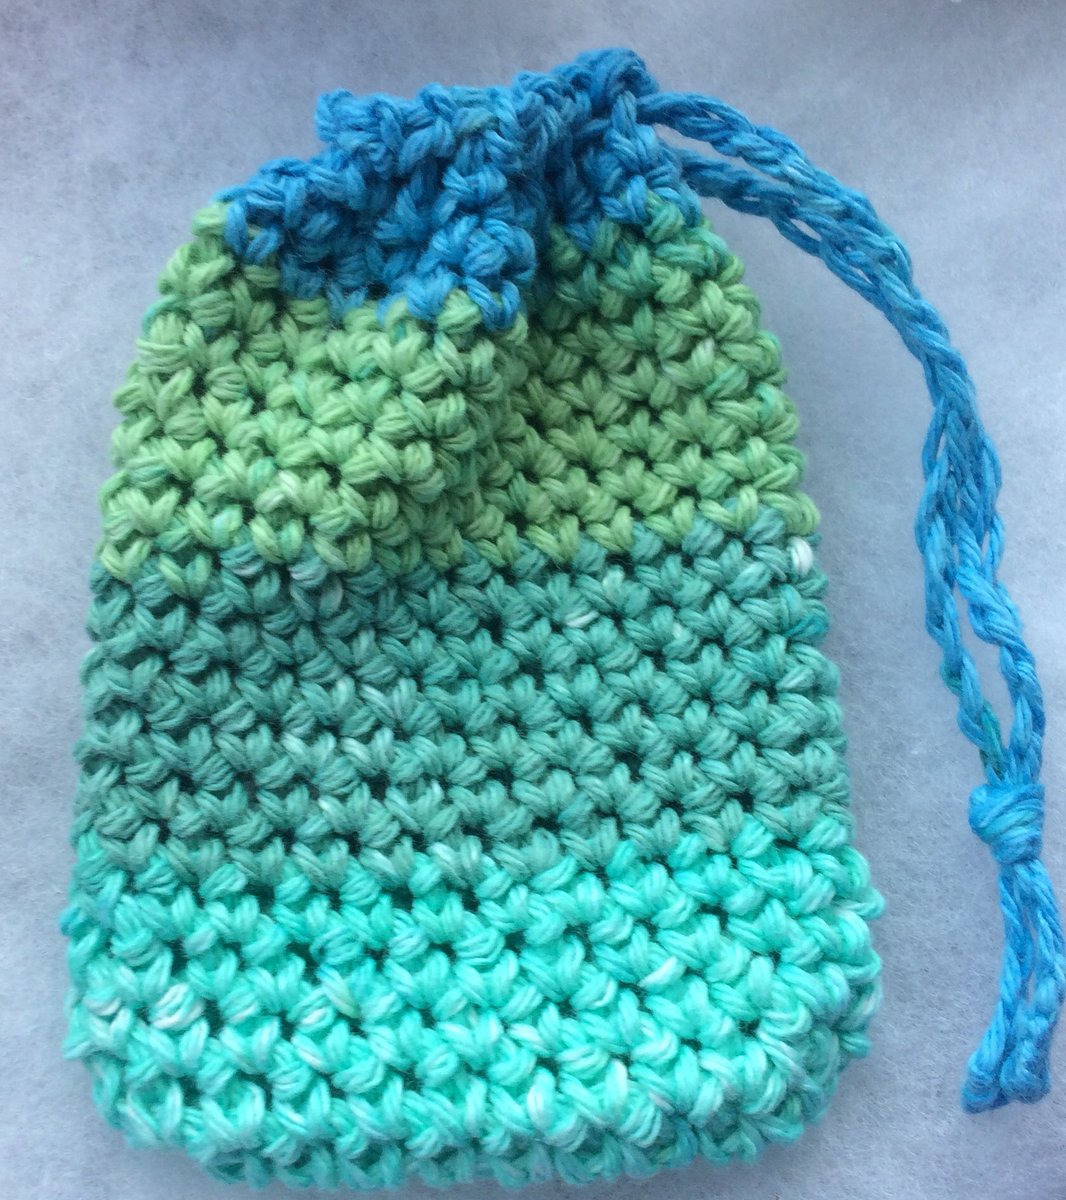 My first soap saver in Lily brand Sugar n Cream 💯 % cotton yarn 🧶 No more plastic shower gel bottles. Pop in a bar of soap and away you go! Eco friendly crochet 🥰 #ecocrochet #ecofriendly #crochet #soapsaverbag 🌎